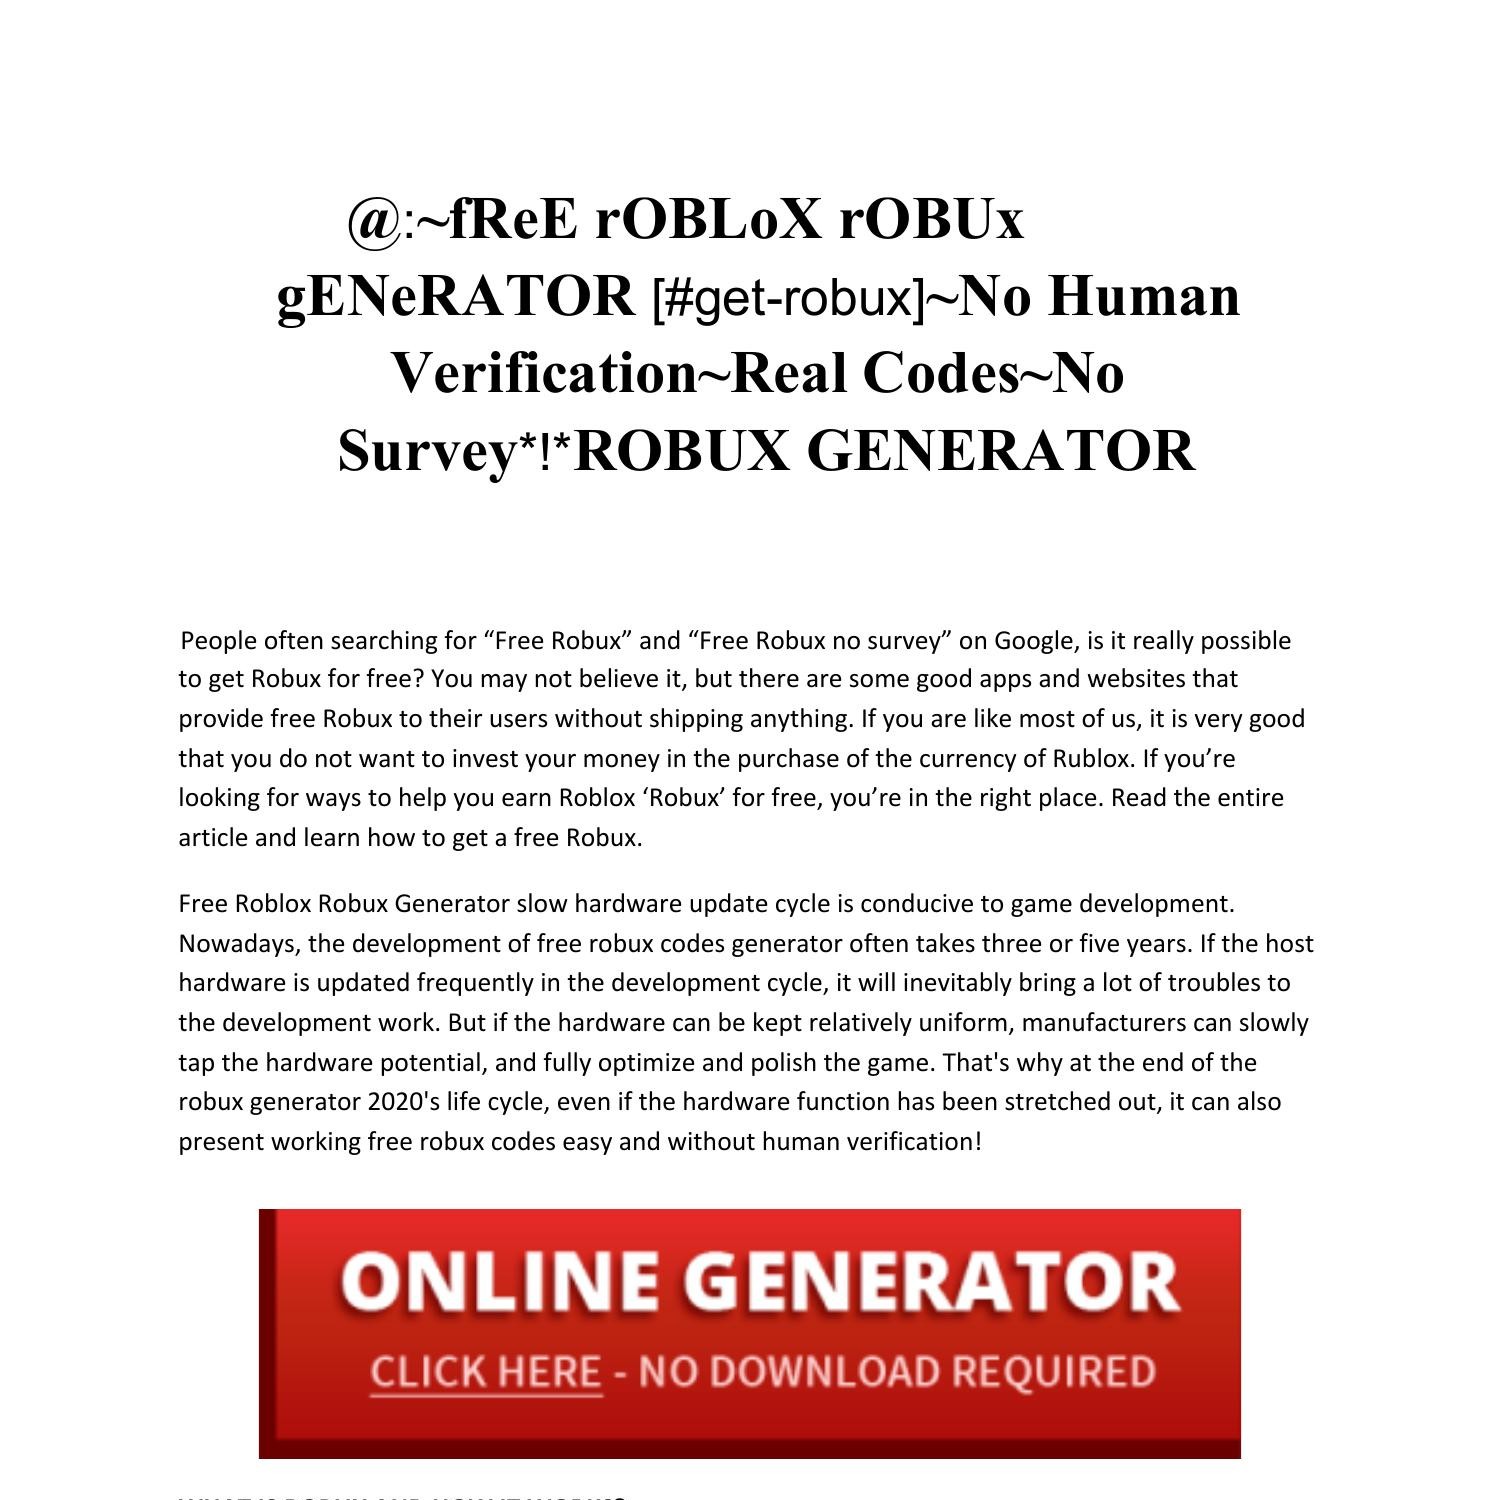 Me fale um gerador de robux gratis que funciona GPT: I'm sorry, but there  is no such thing as a free Robux generator that actually works. Any website  or tool that claims